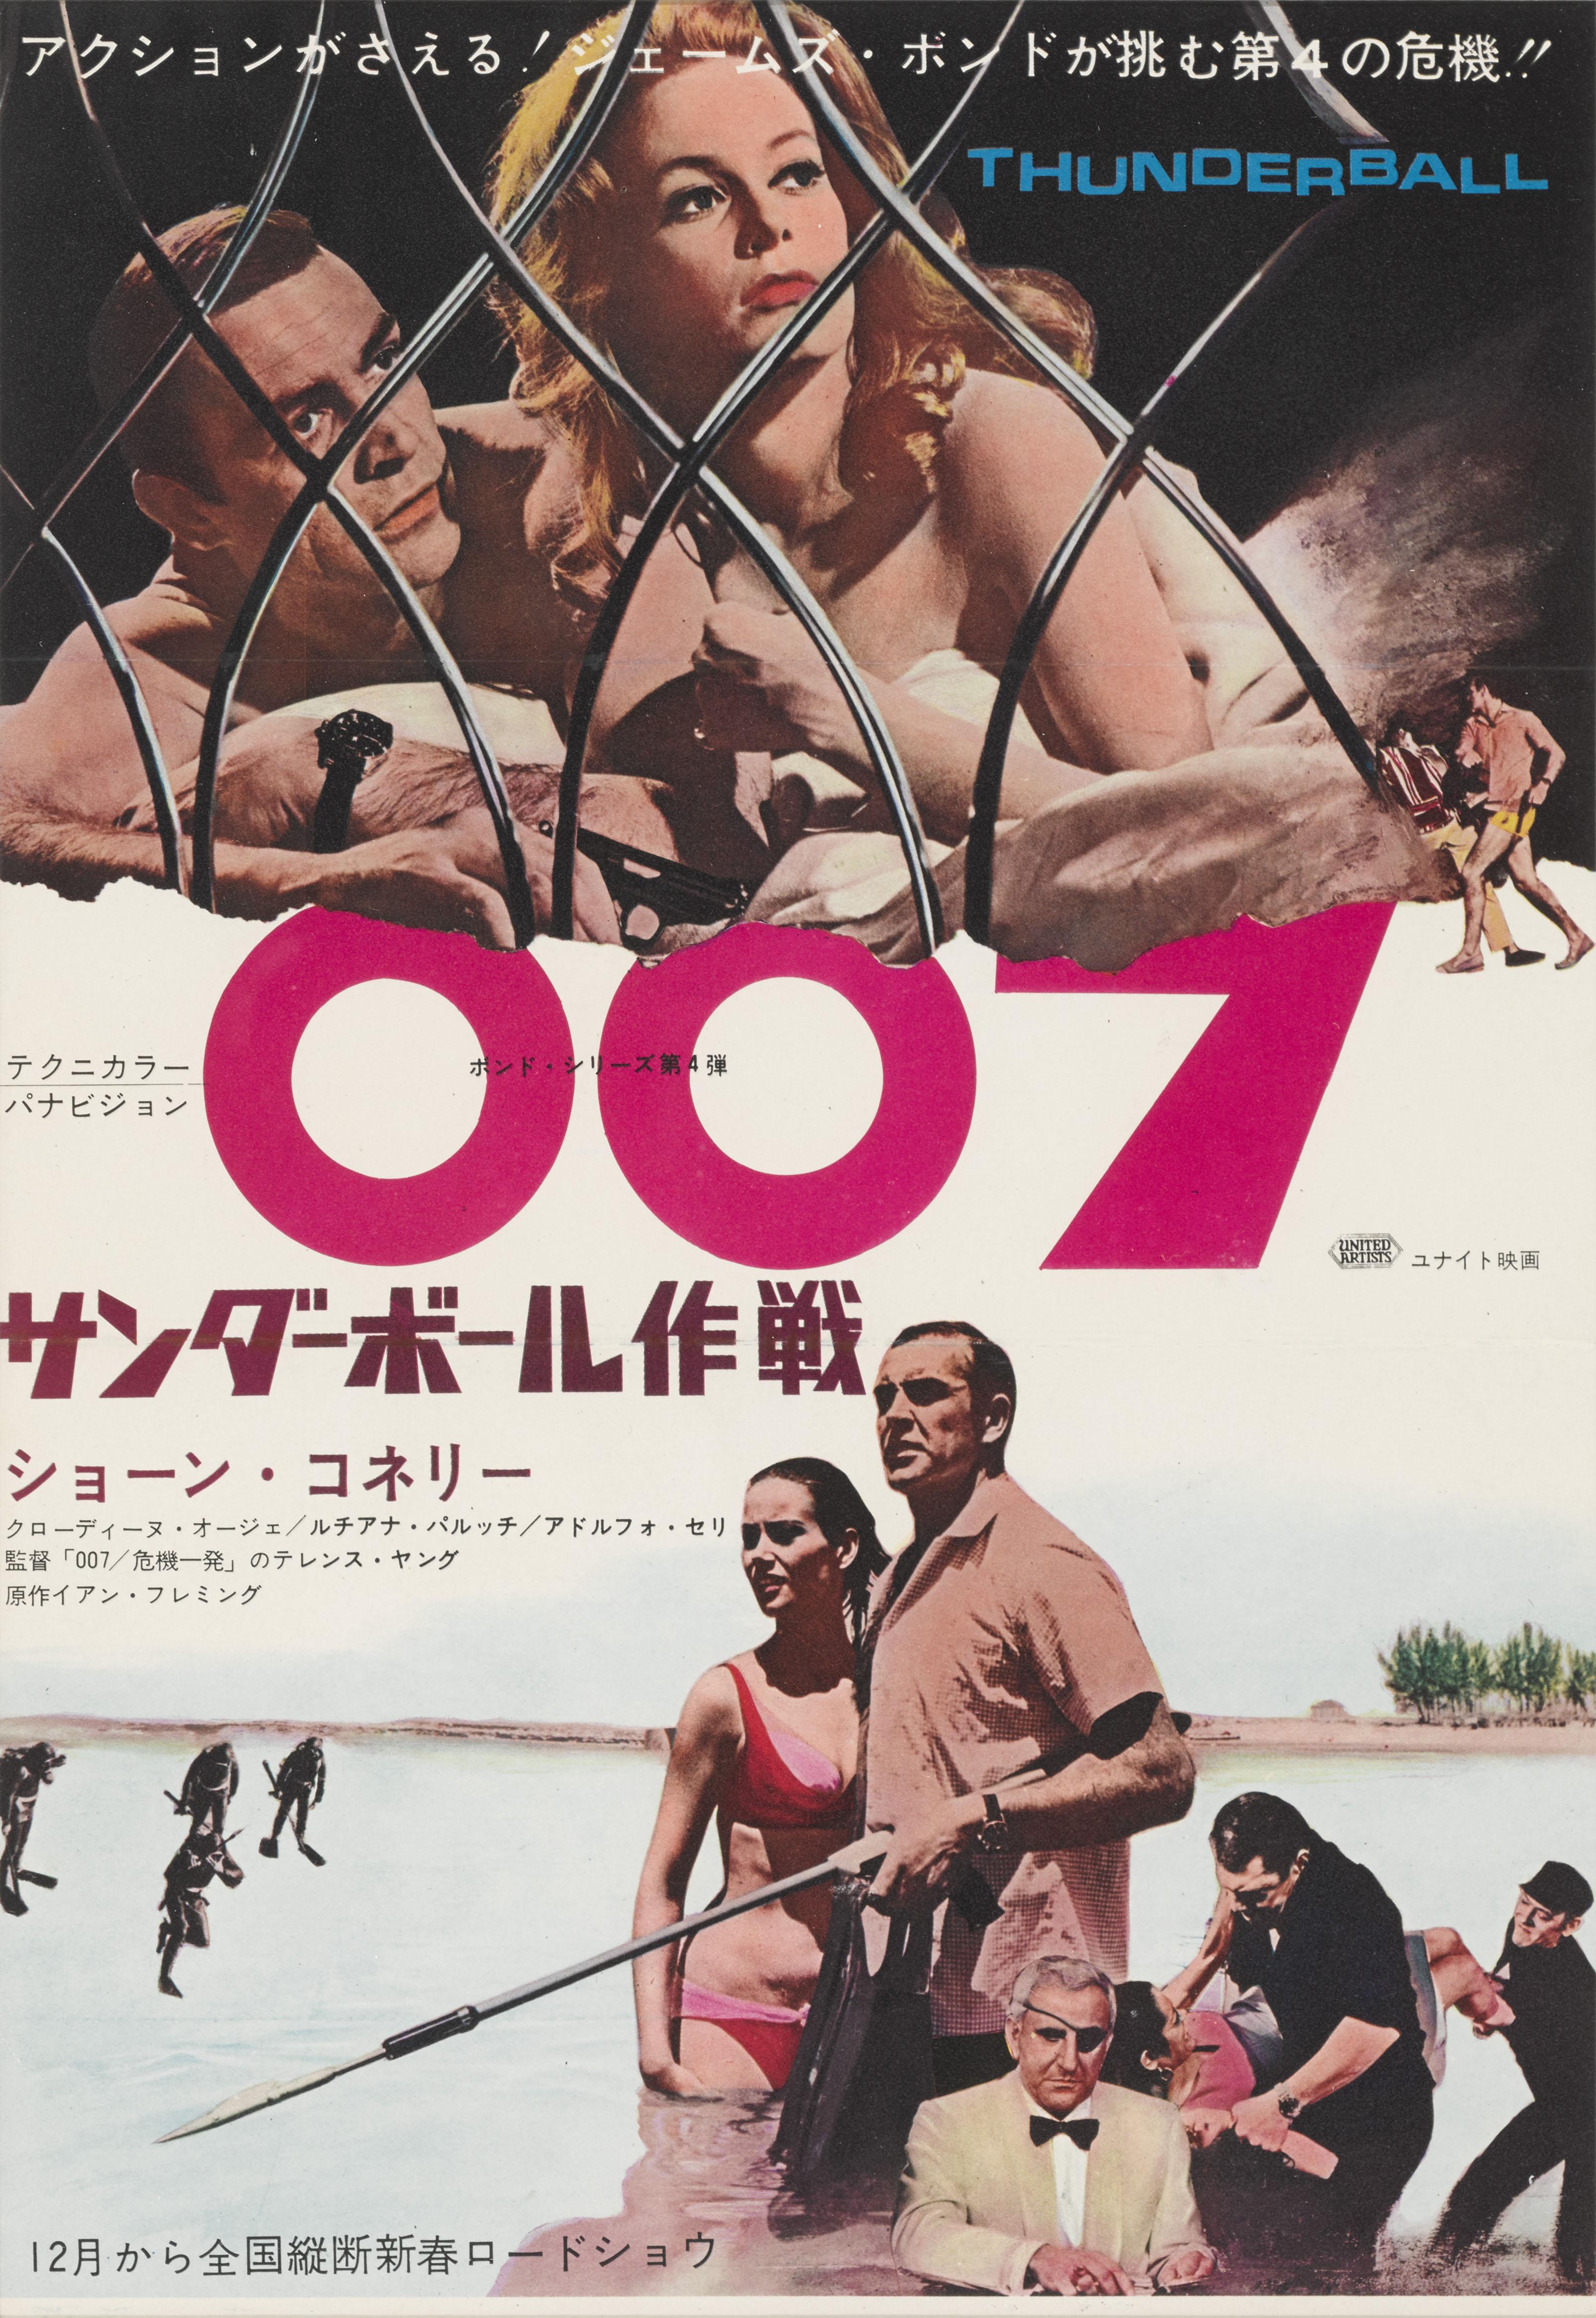 Original Japanese trade advertisement from the first release of the film in 1965.
This was the fourth in the James Bond series produced by Eon Productions, and starring Sean Connery. The film was directed by Terence Young, who had directed the first